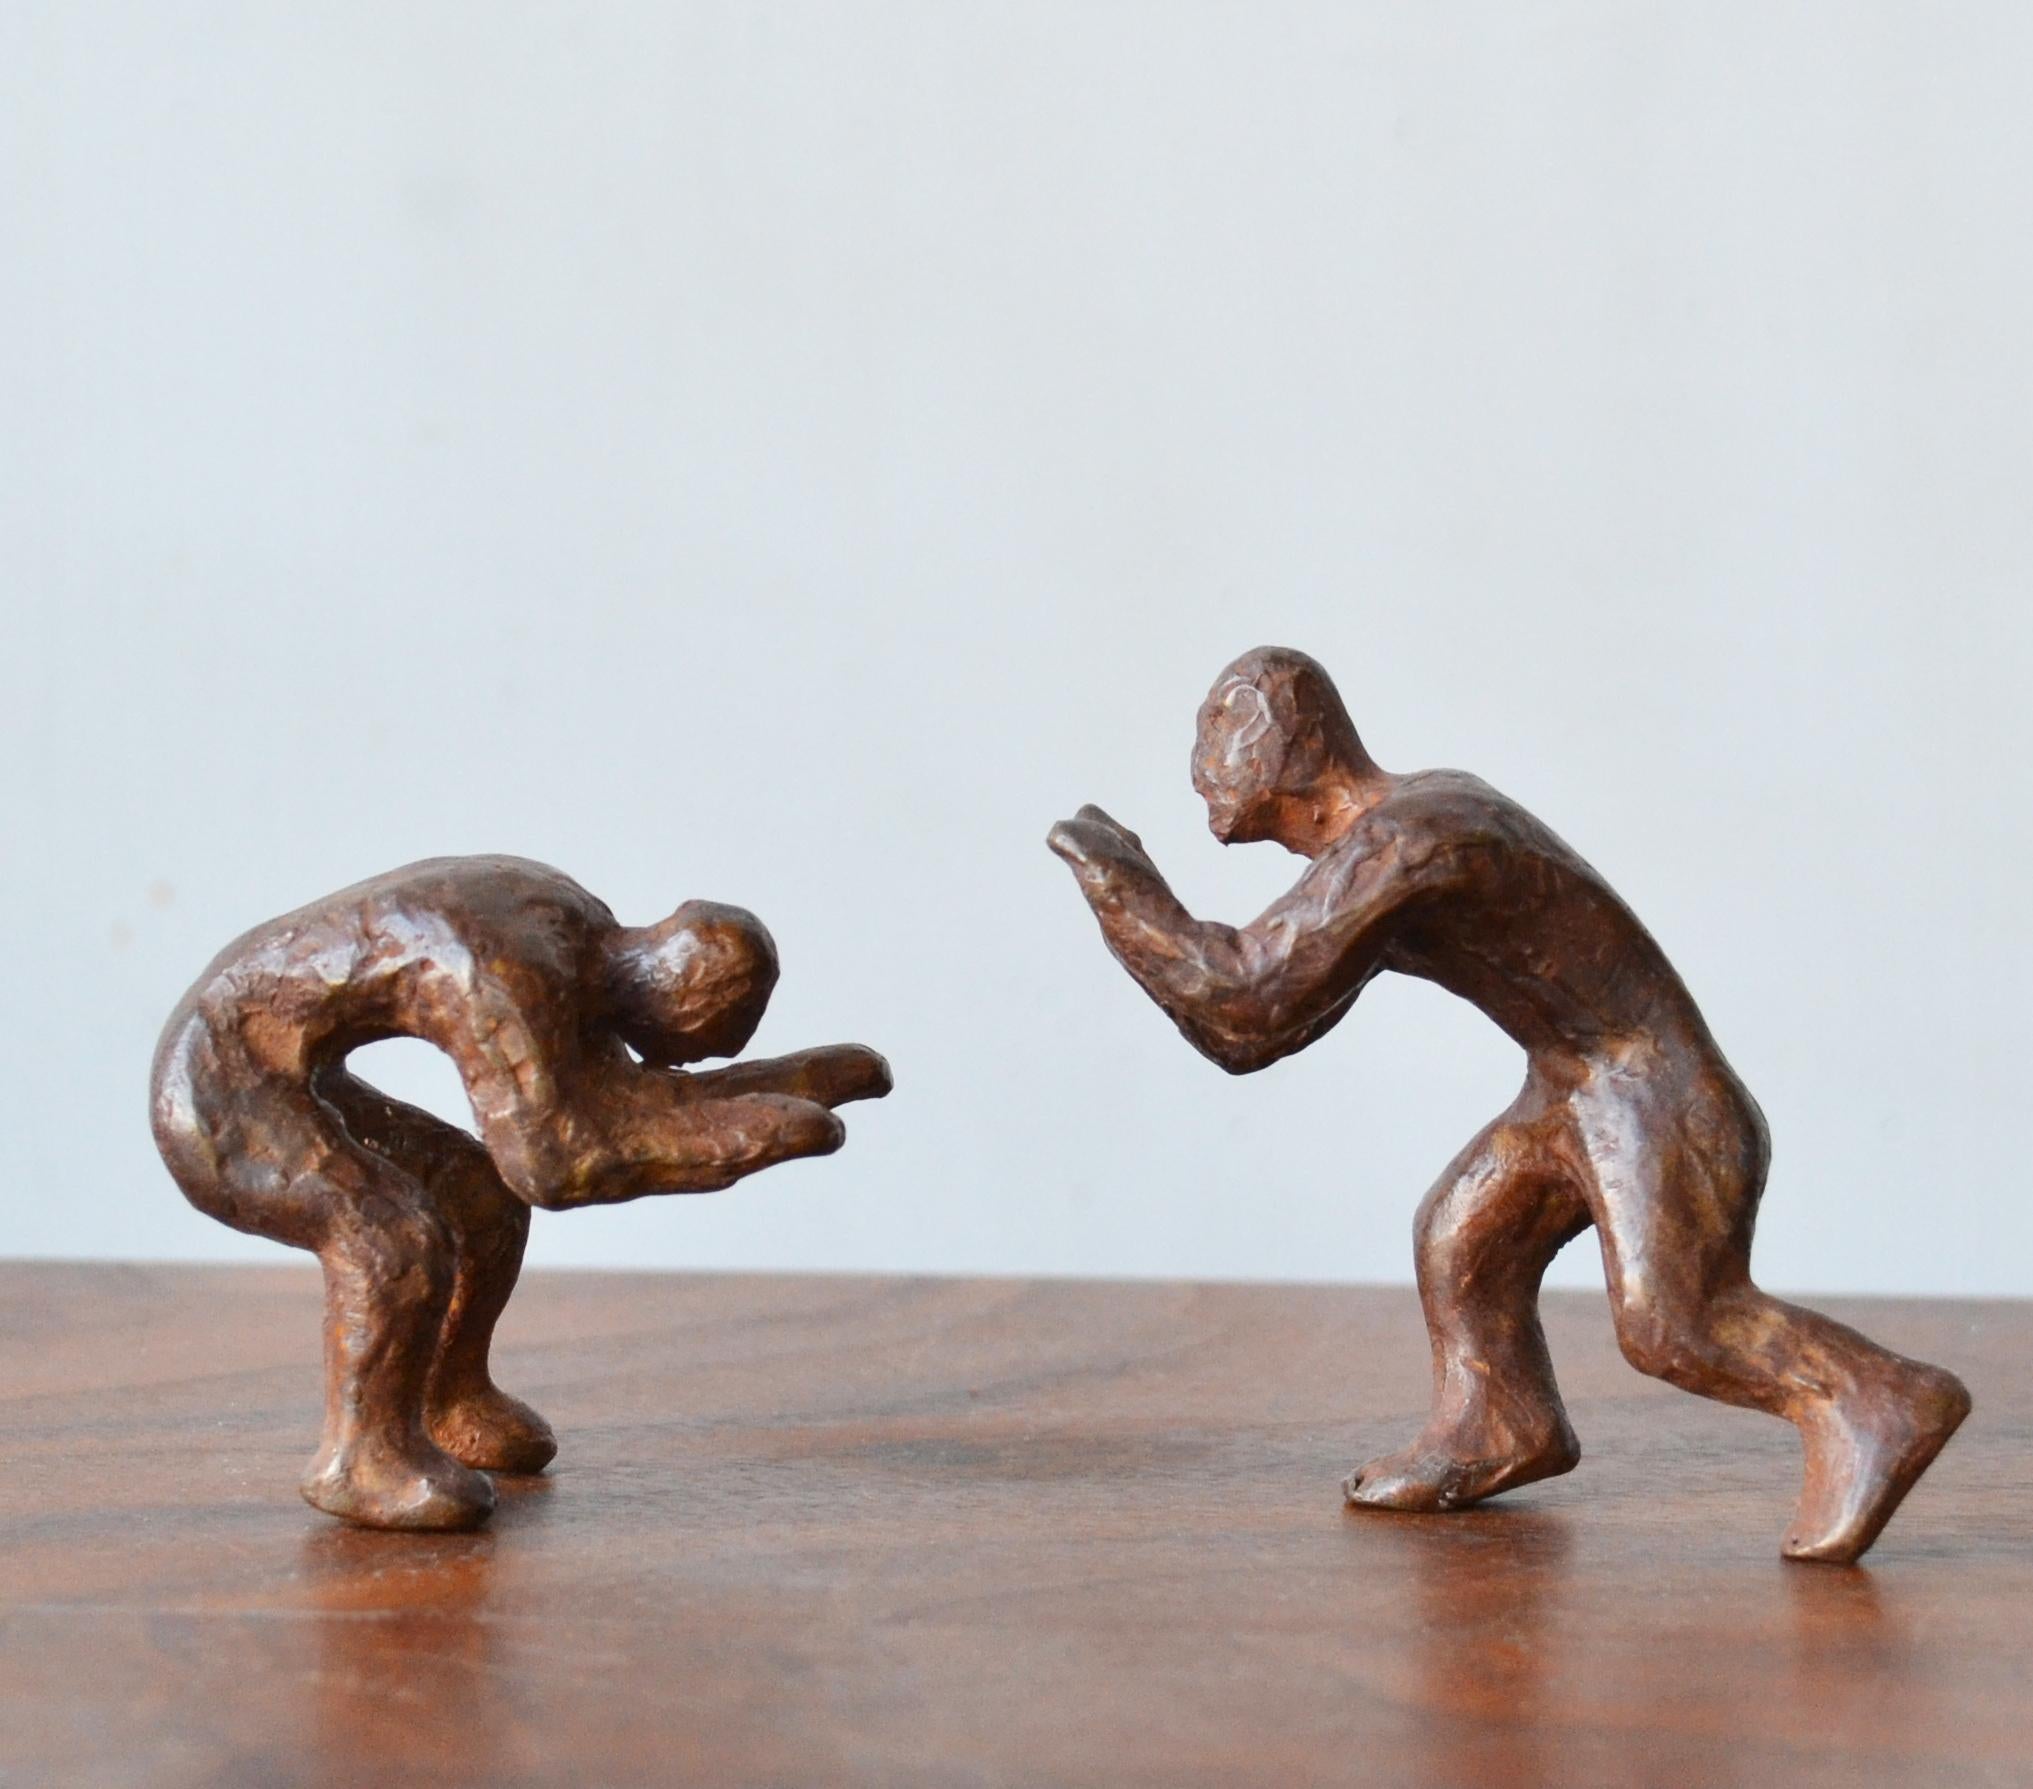 Why Fight When You Can Play? -playful interactive bronze figures sold in pairs - Contemporary Sculpture by Noa Bornstein